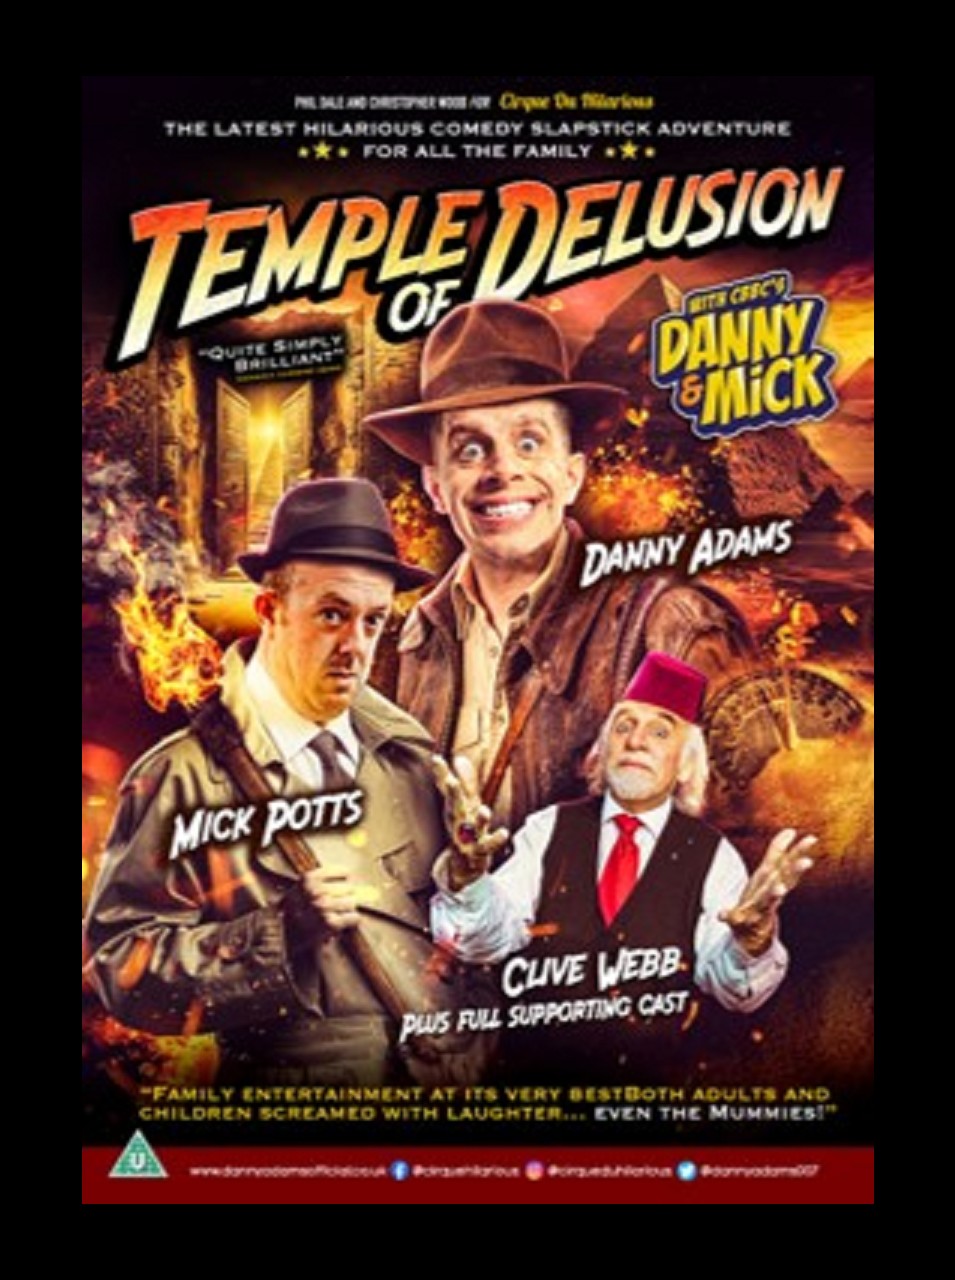 Danny and Mick's THE TEMPLE OF DELUSION